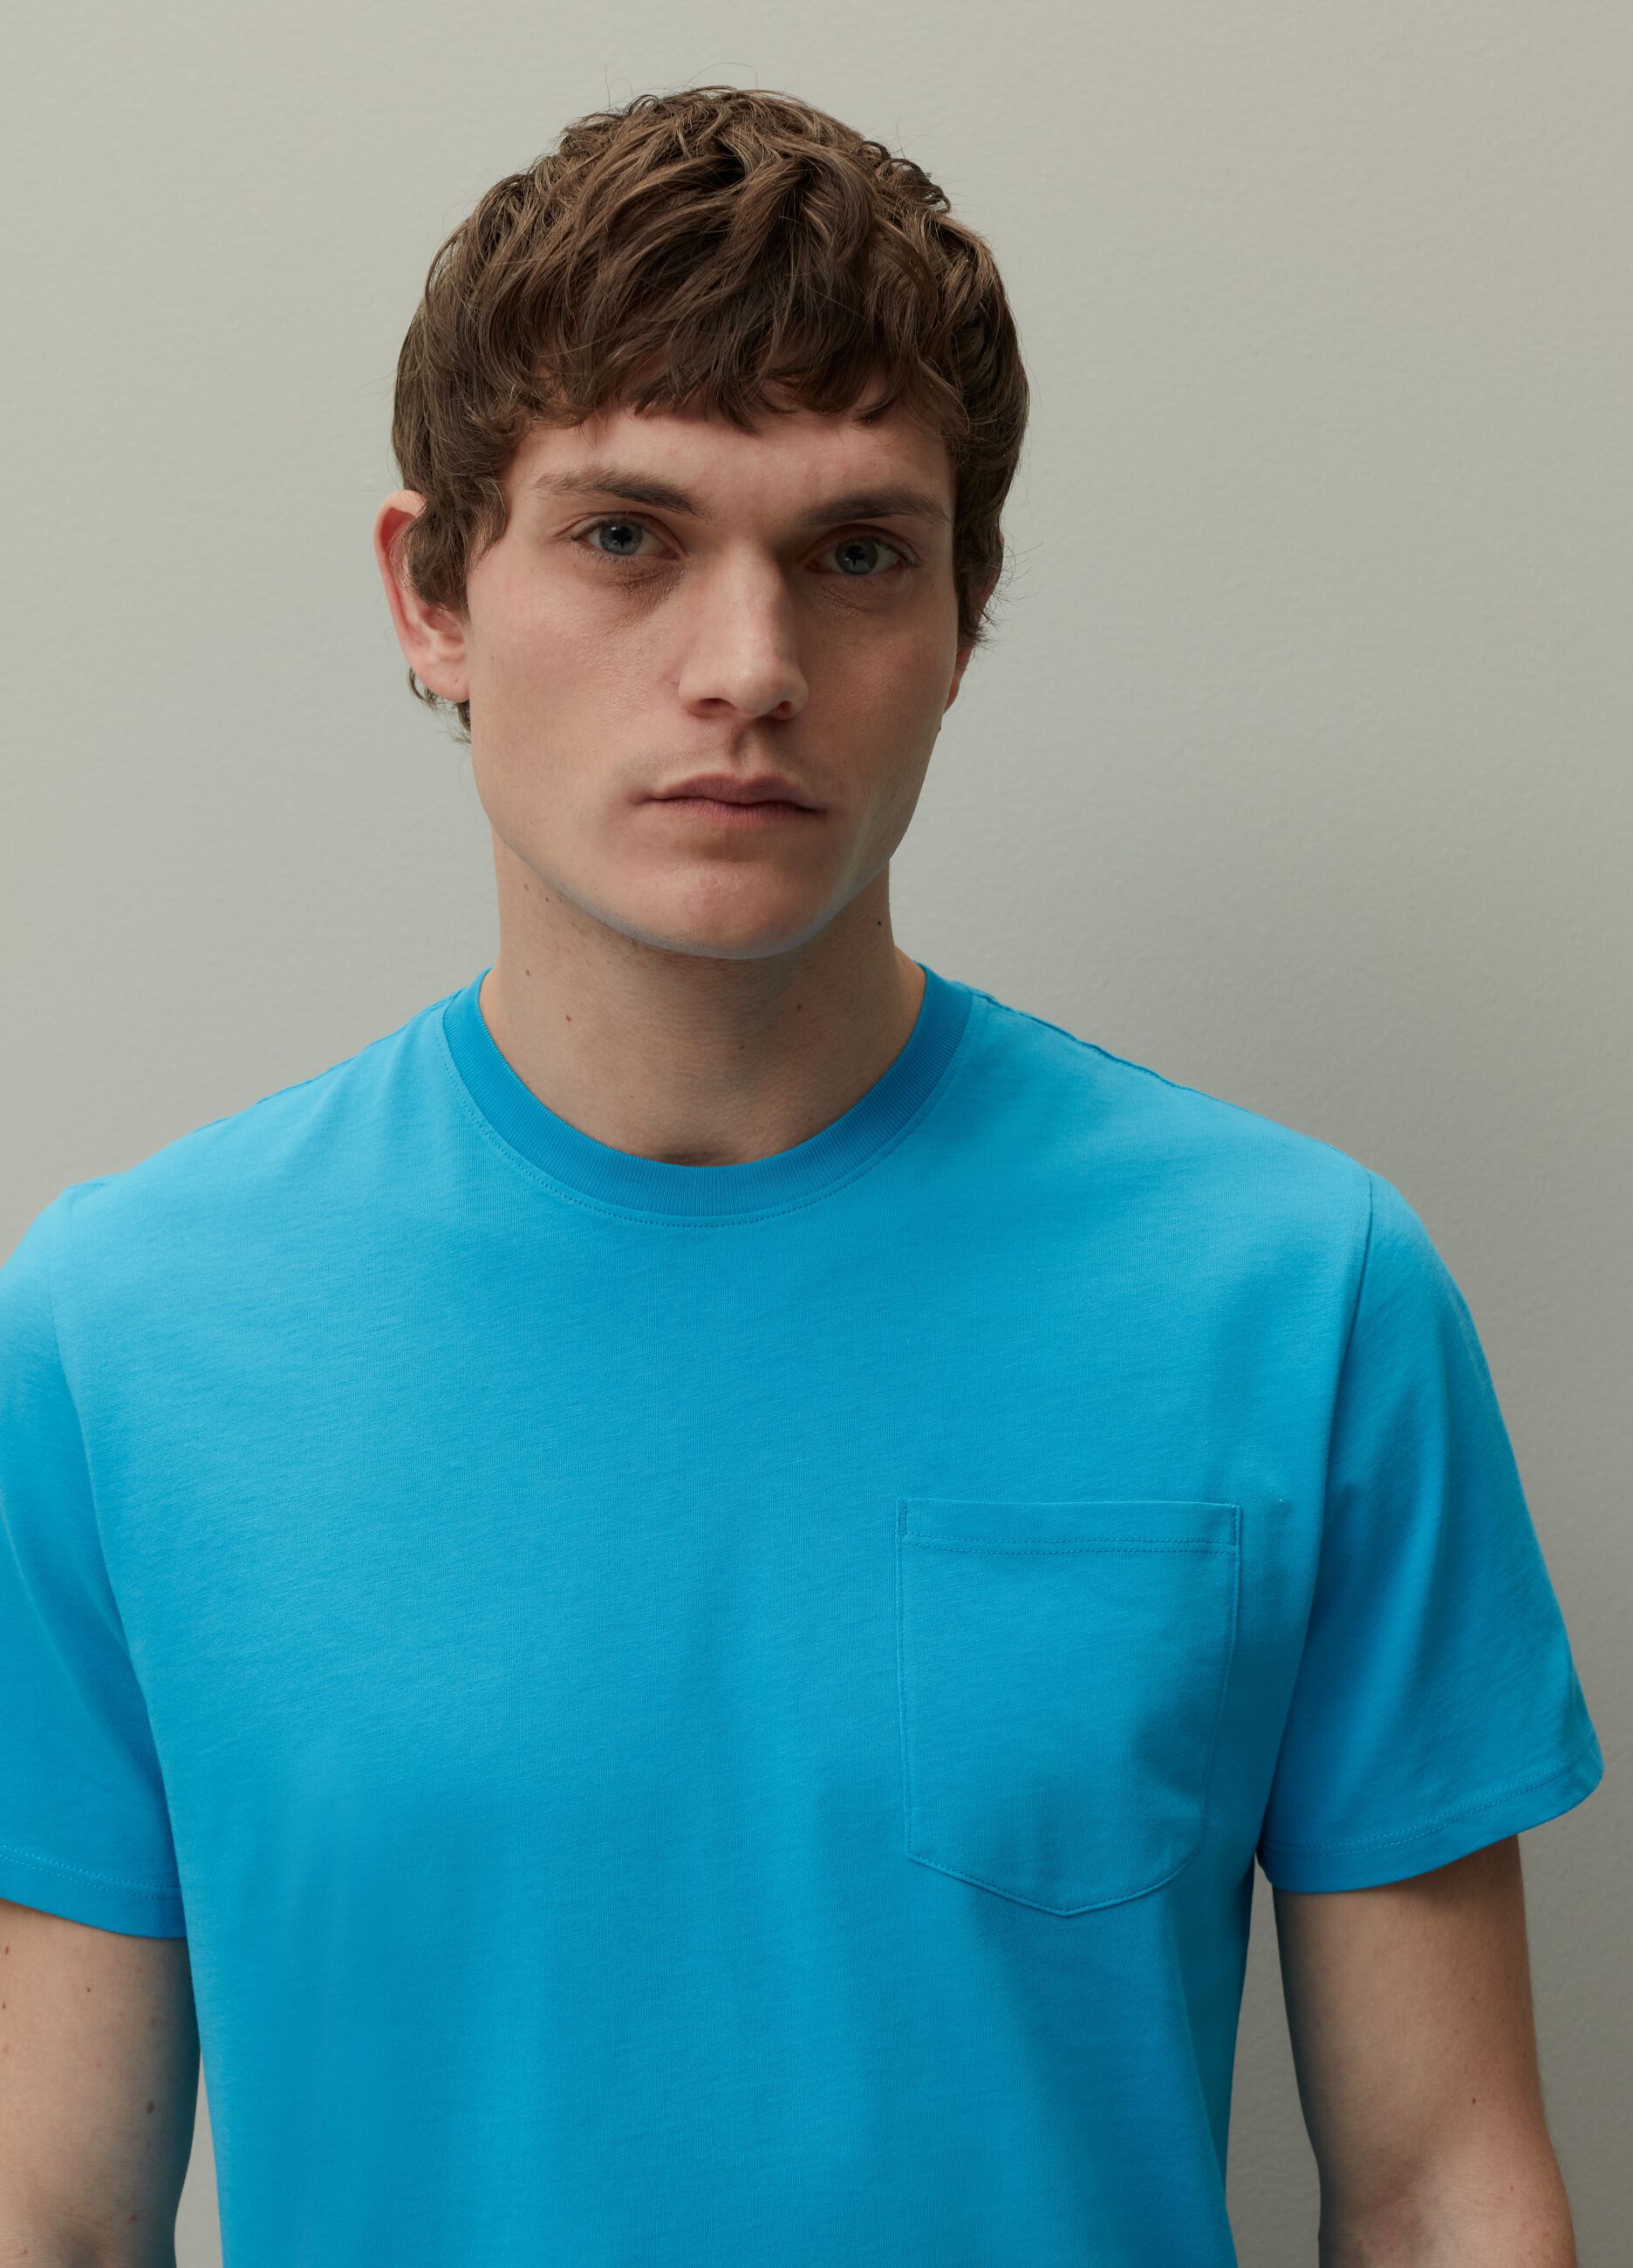 T-shirt in Supima cotton with pocket